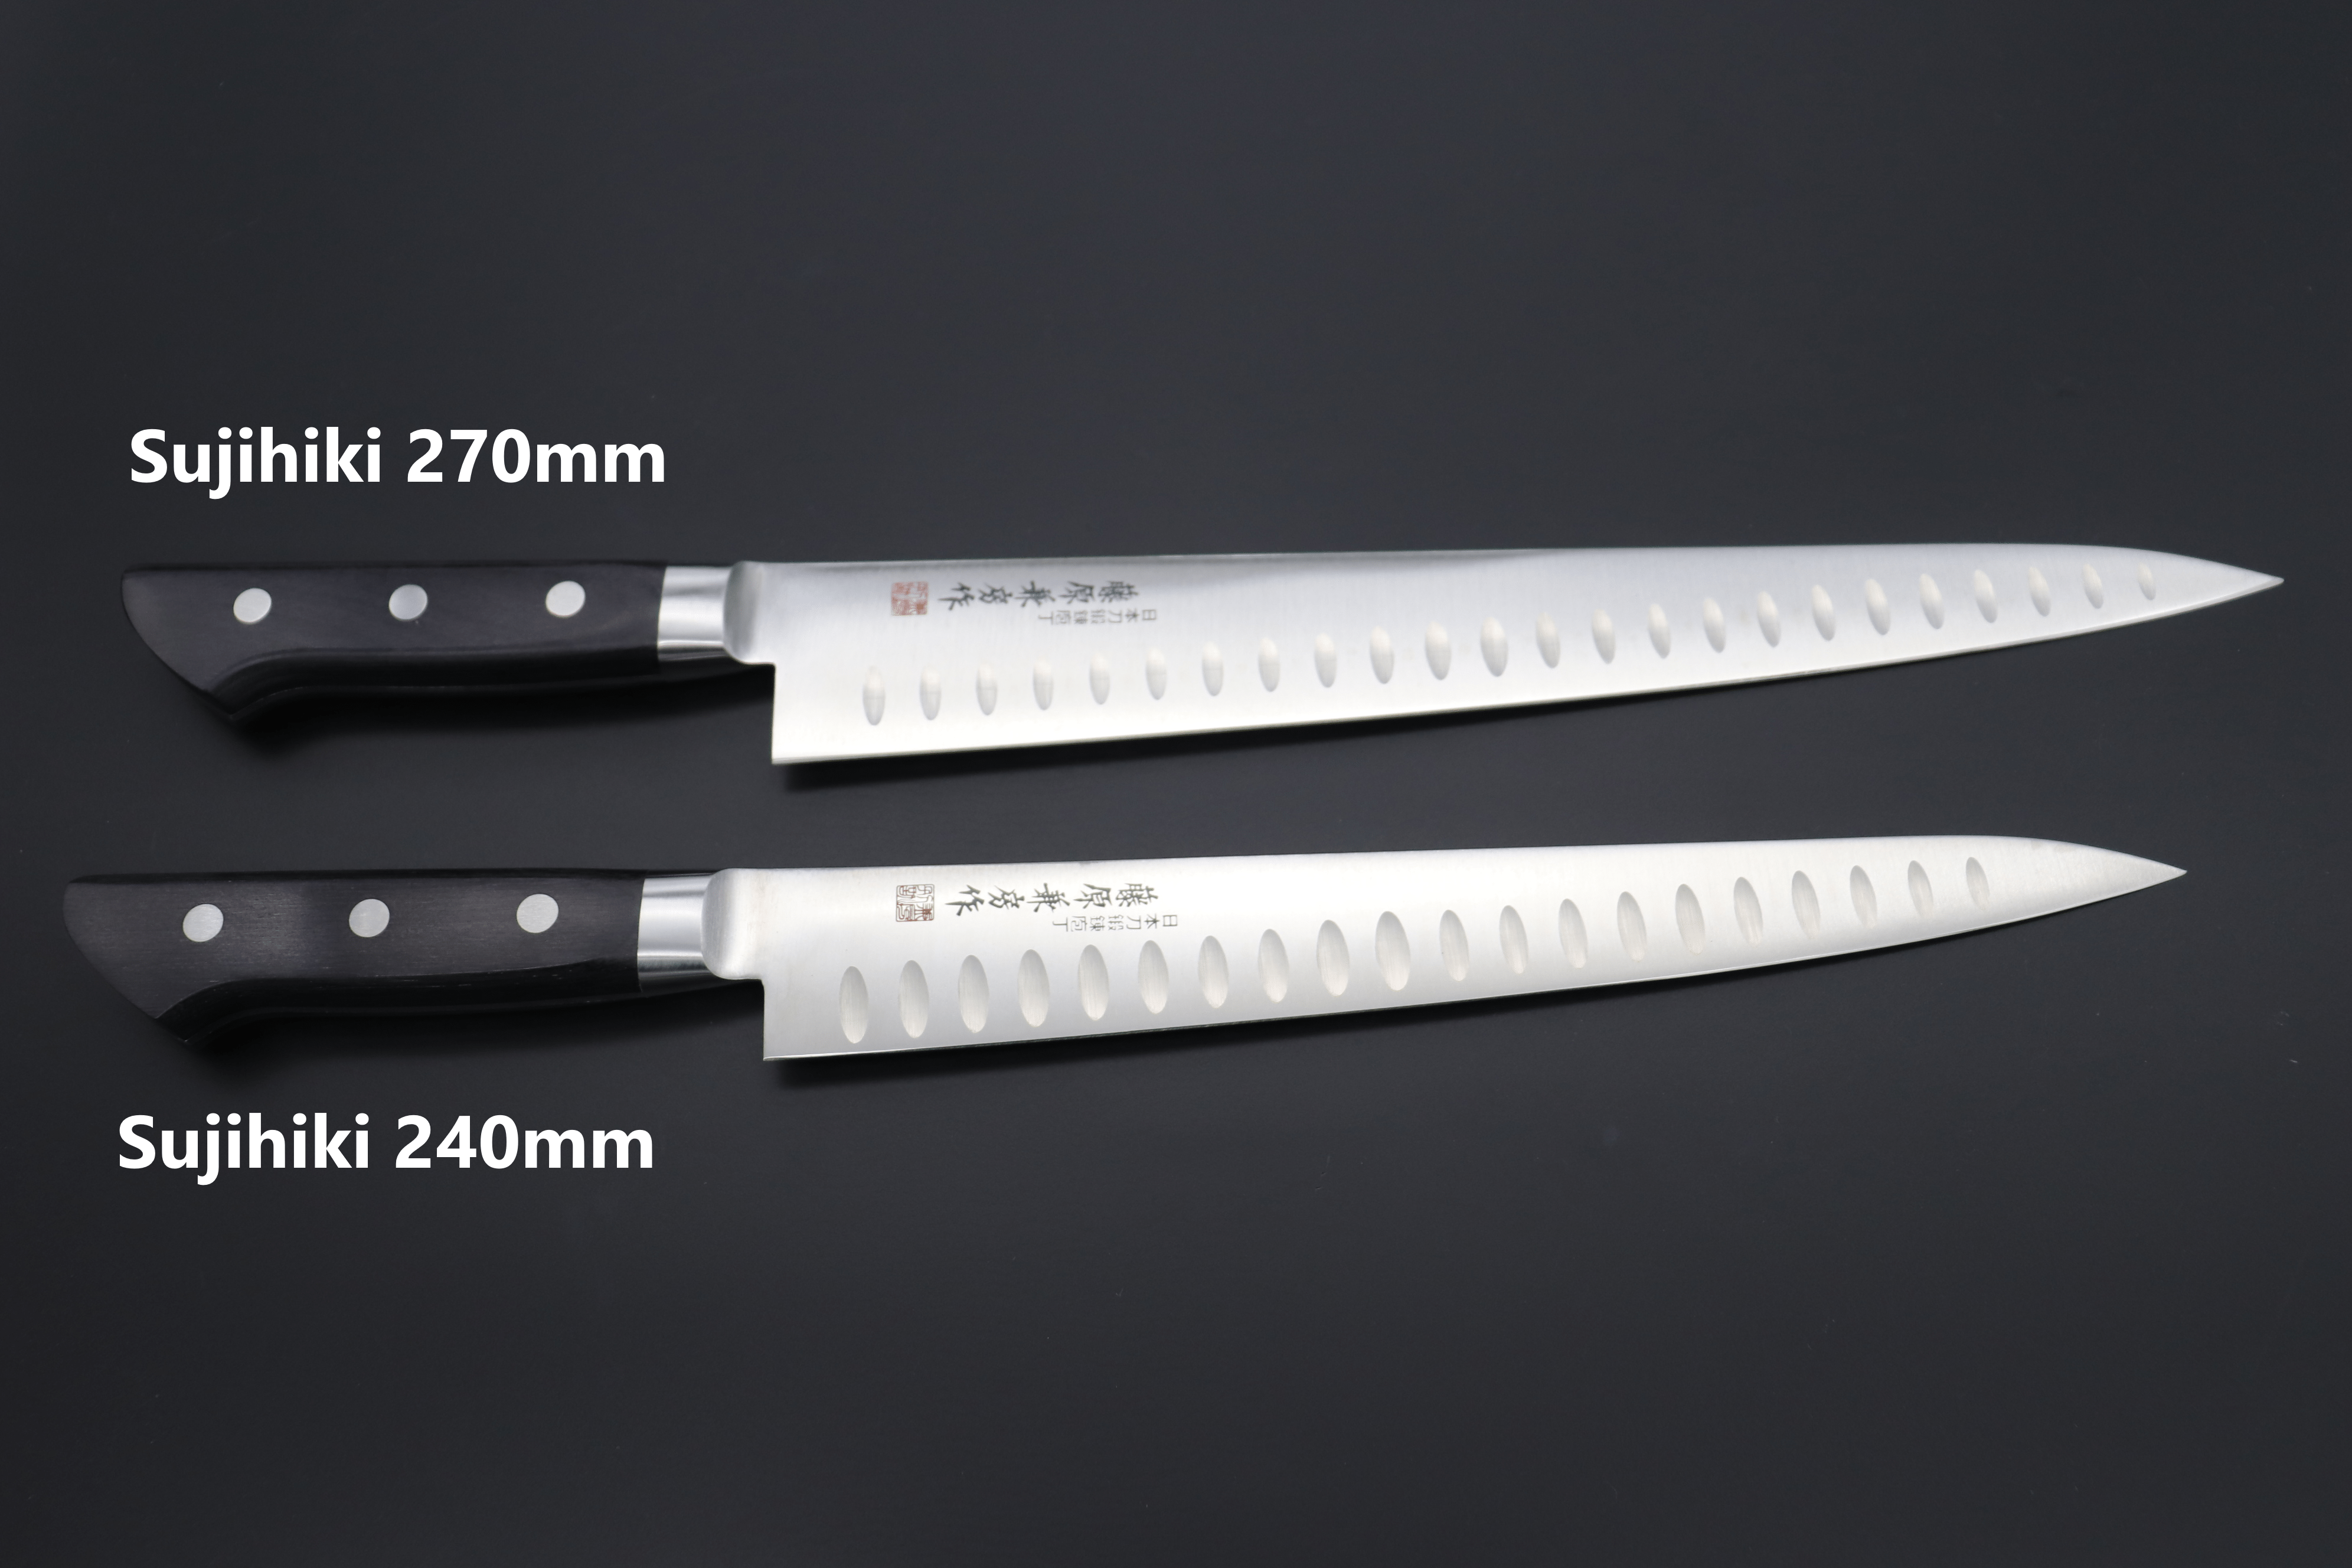  MAC Knife Professional series 8 Chef's knife w/dimples MTH-80: Chefs  Knives: Home & Kitchen